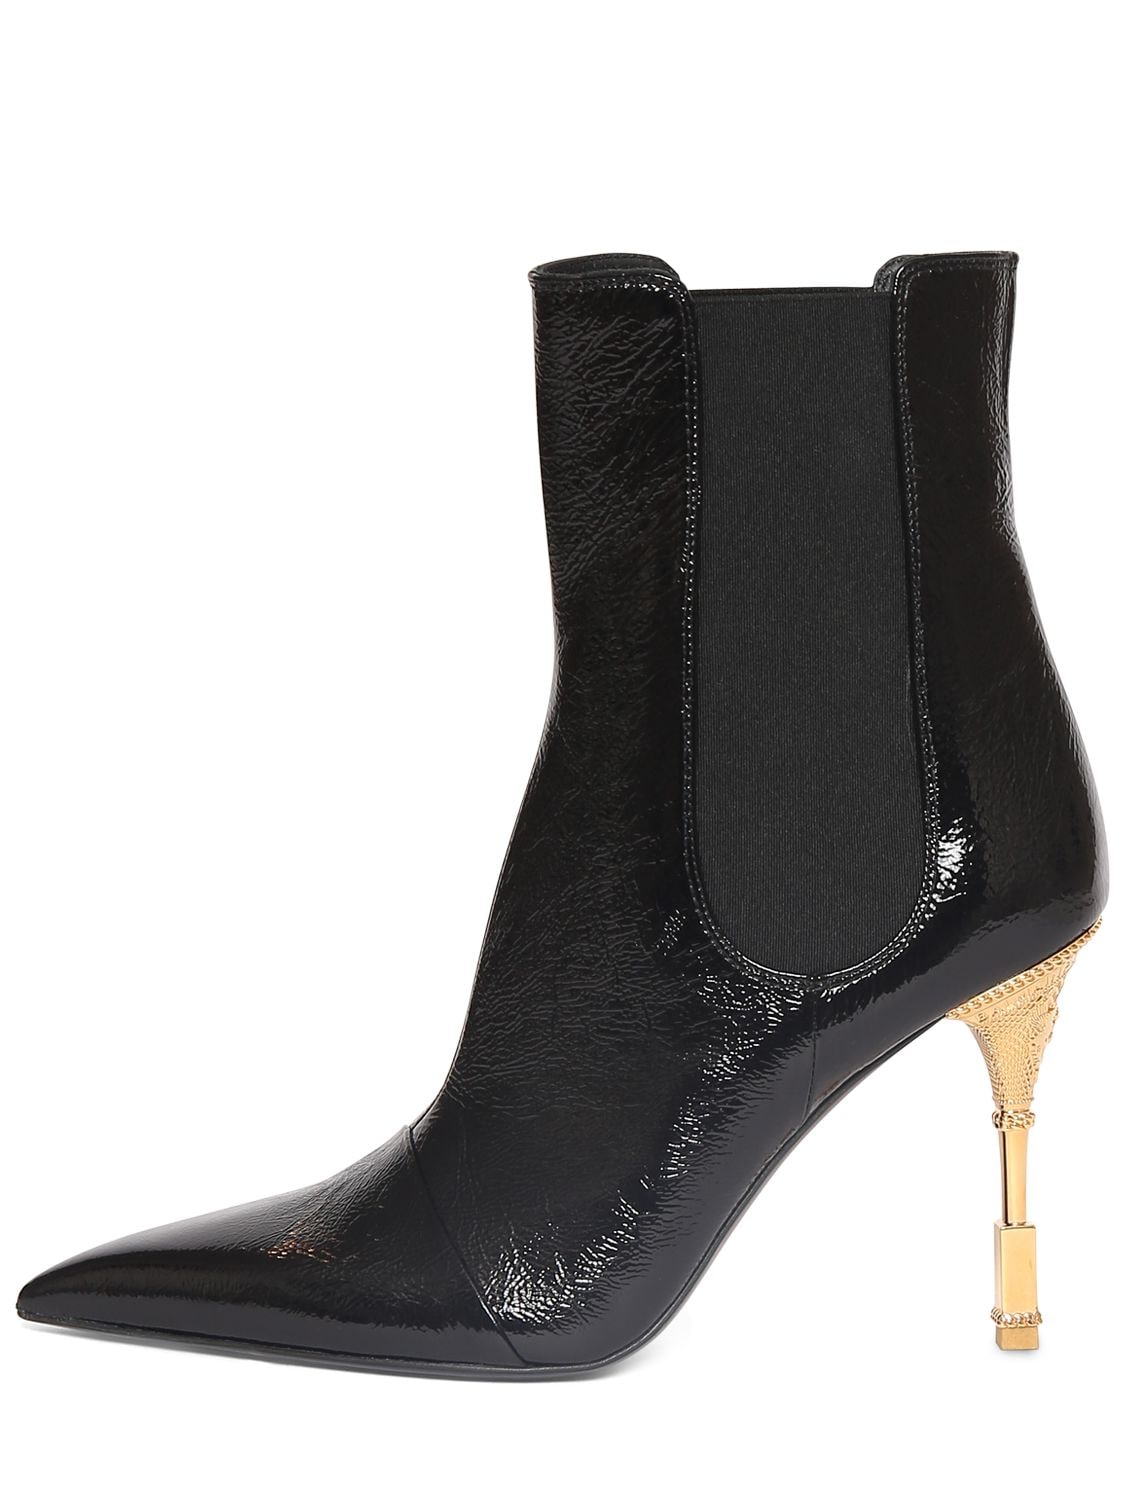 Balmain 95mm Moneta Patent Leather Ankle Boots In Black